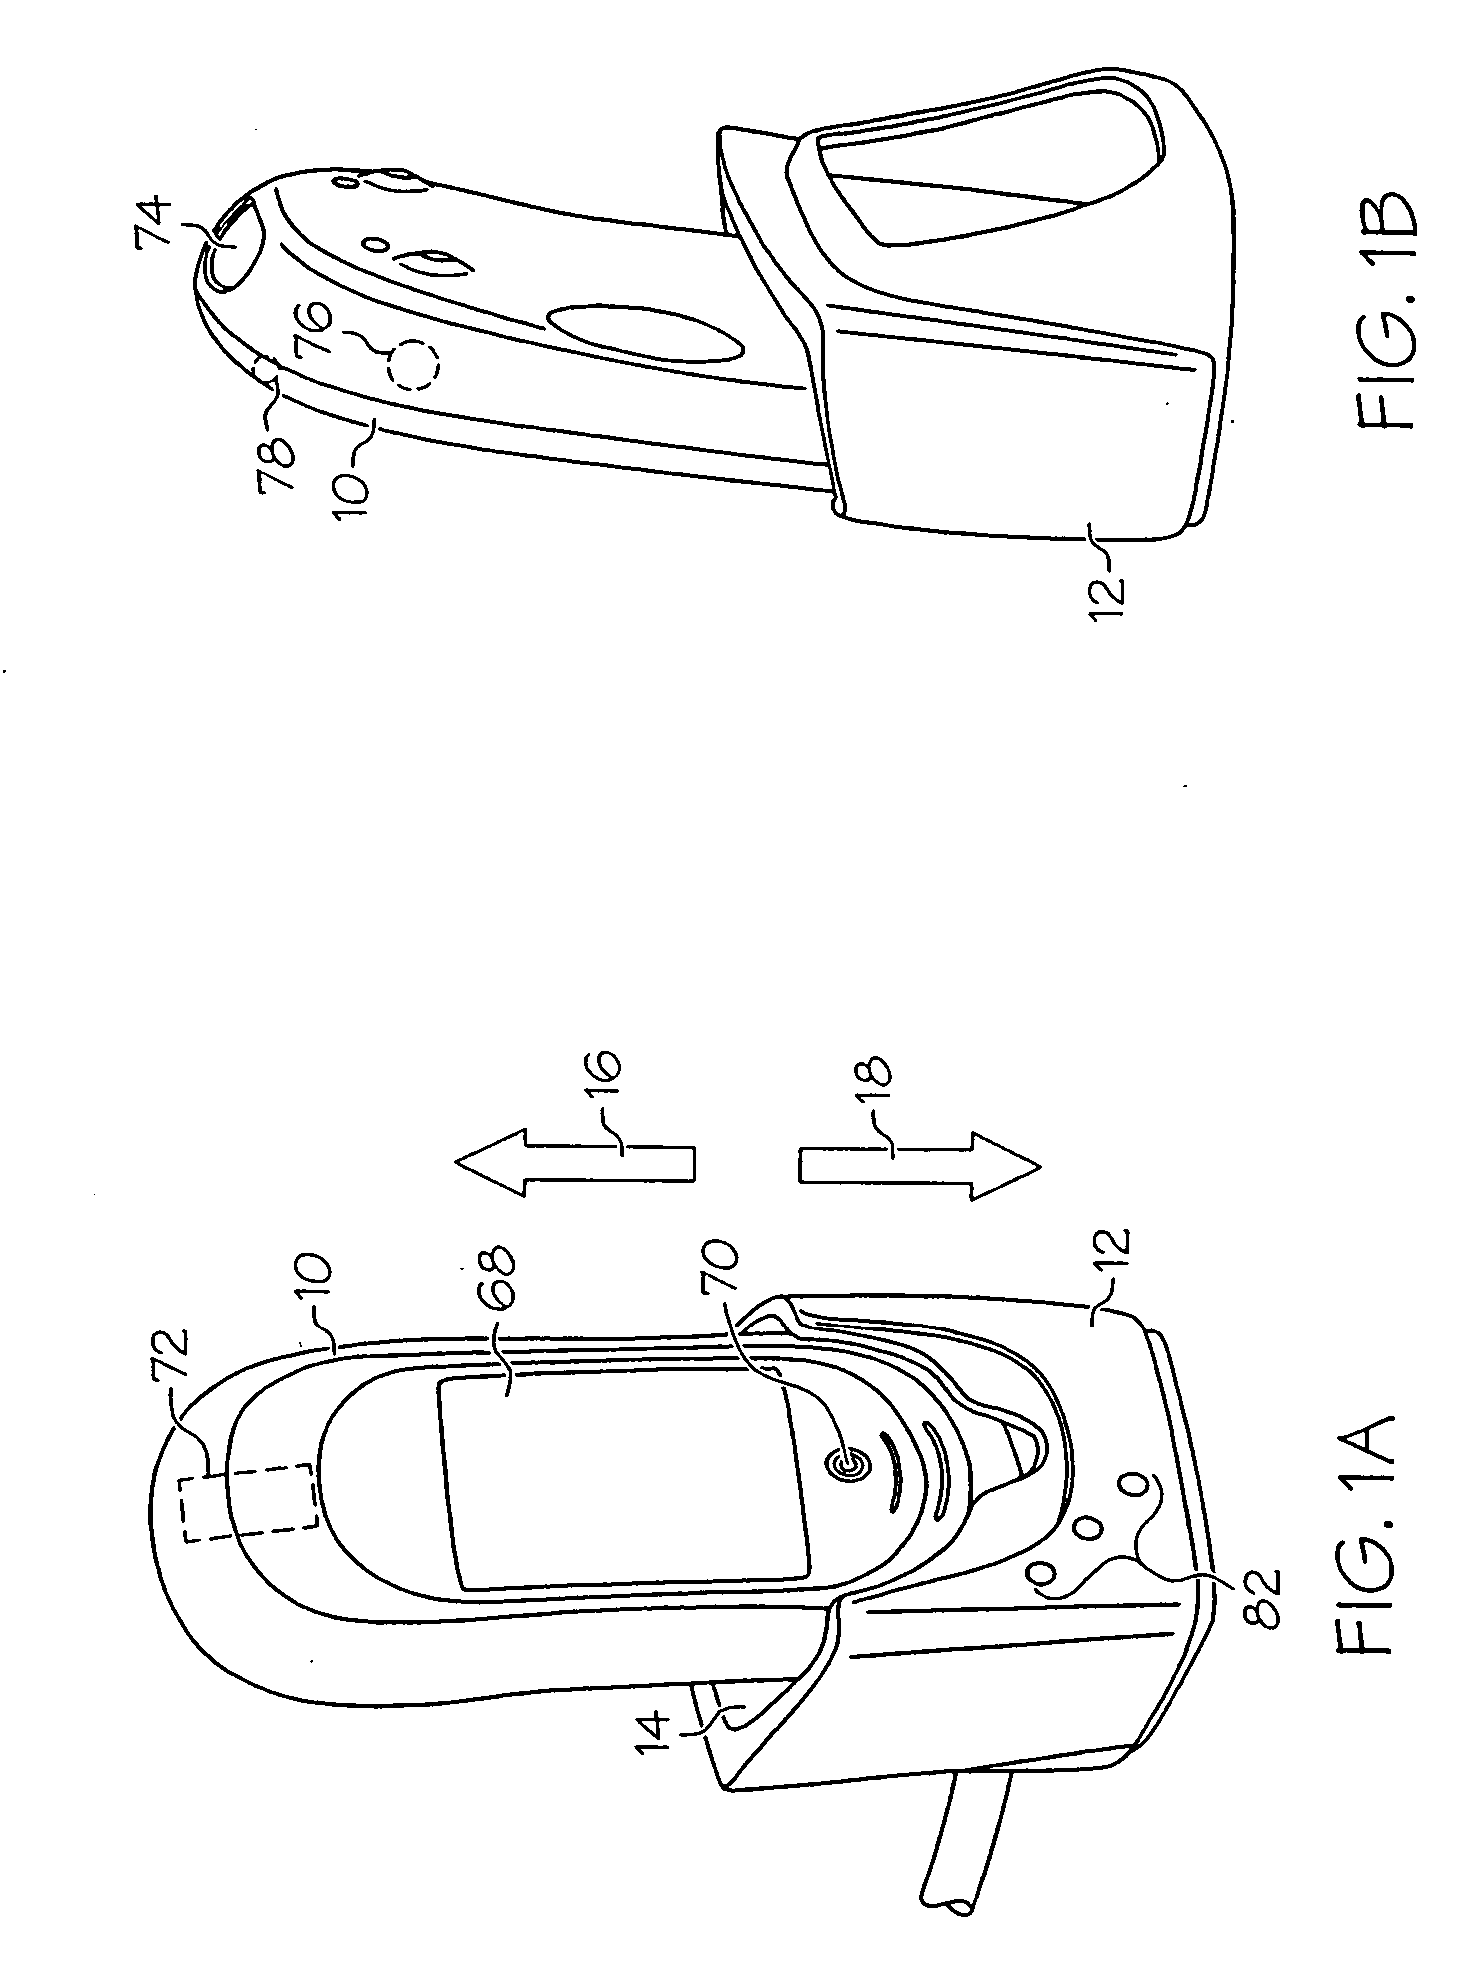 Apparatus and method to administer and manage an intelligent base unit for a handheld medical device